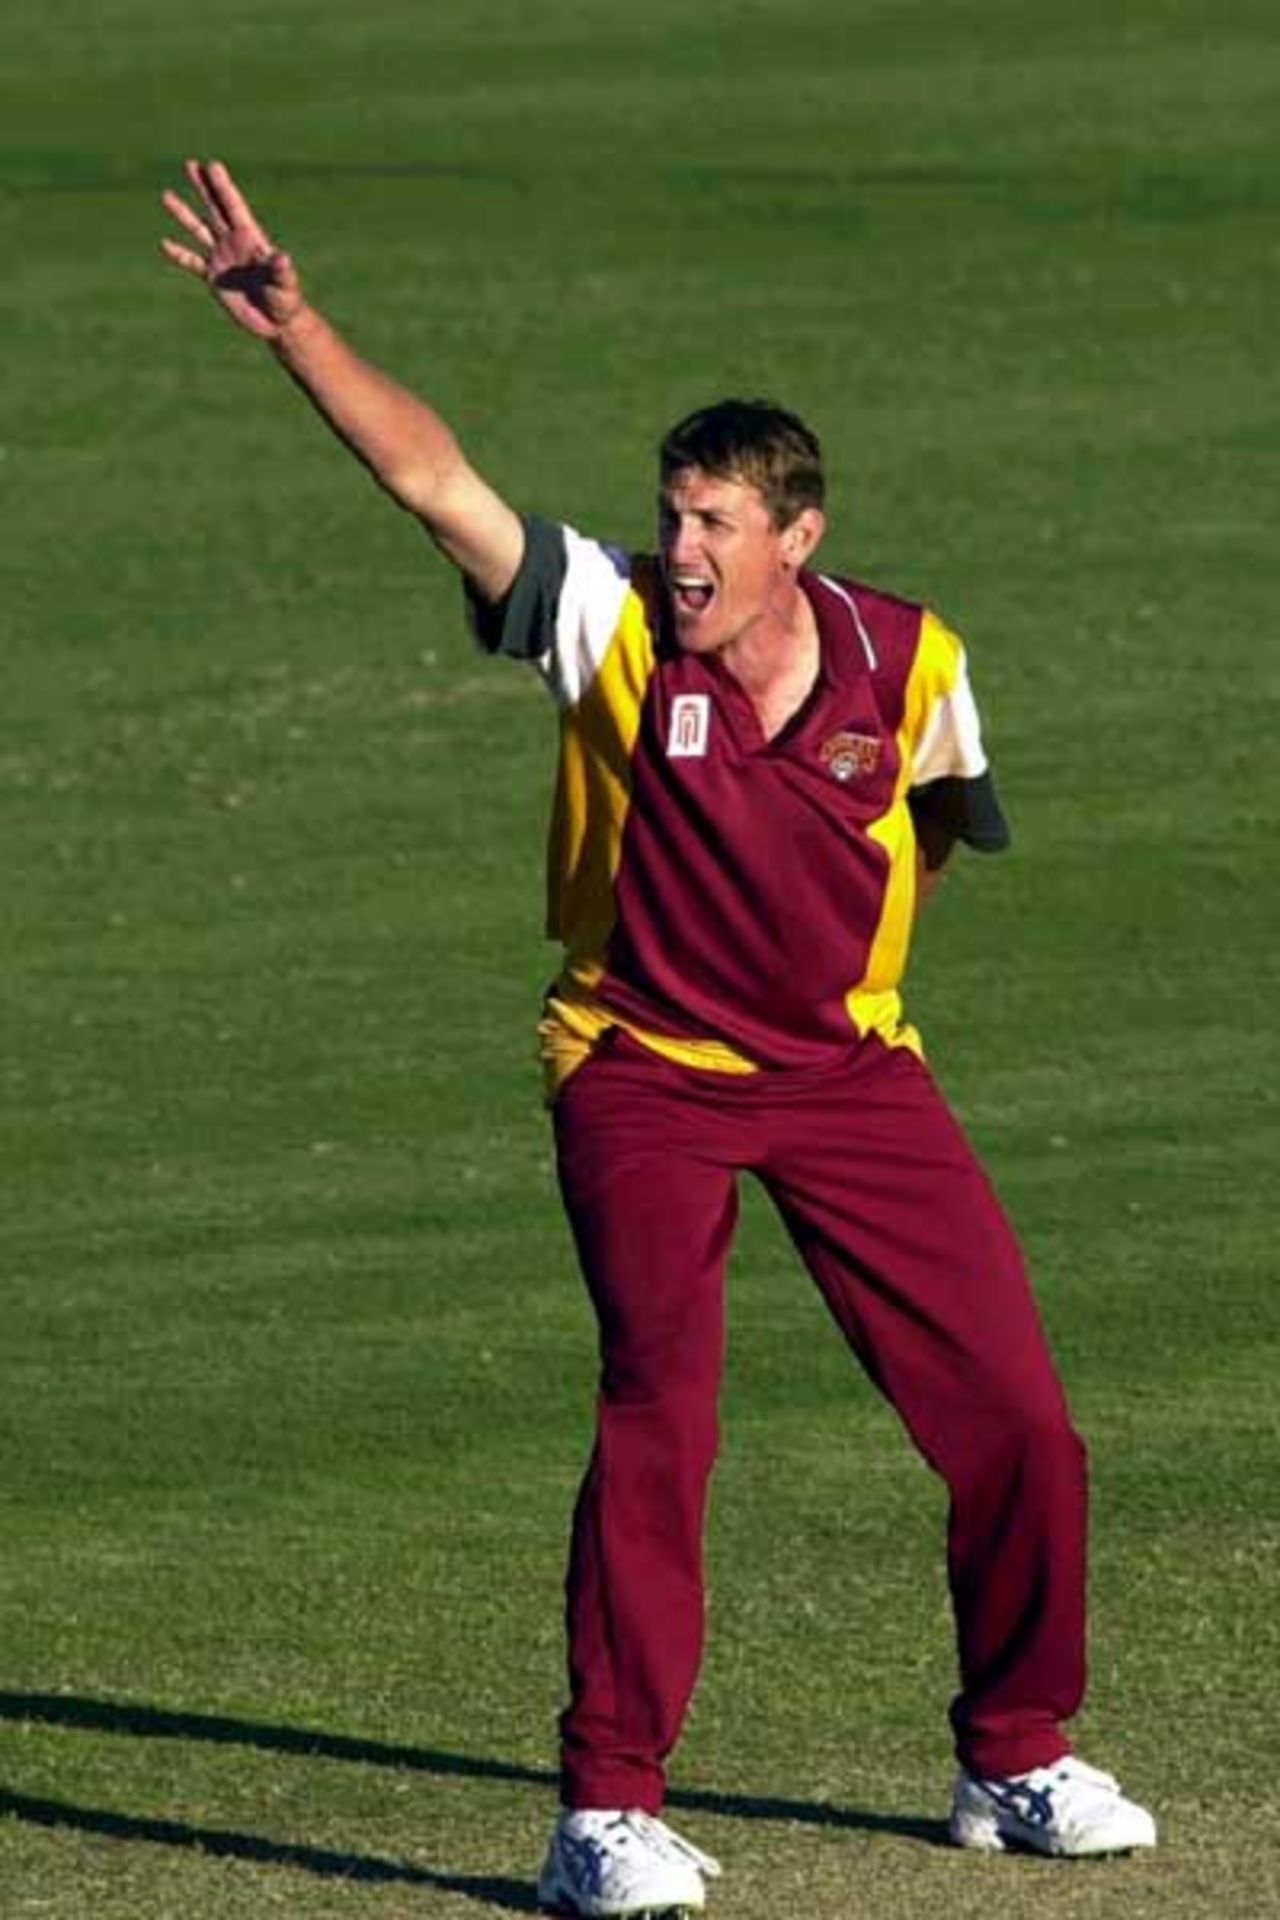 15 Aug 2000: Brendan Creevey of Queensland appeals unsuccessfully for the wicket of Craig McMillan of New Zealand during the New Zealand versus Queensland practice match at Allan Border Field in Brisbane, Australia. Queensland won the game by 23 runs.